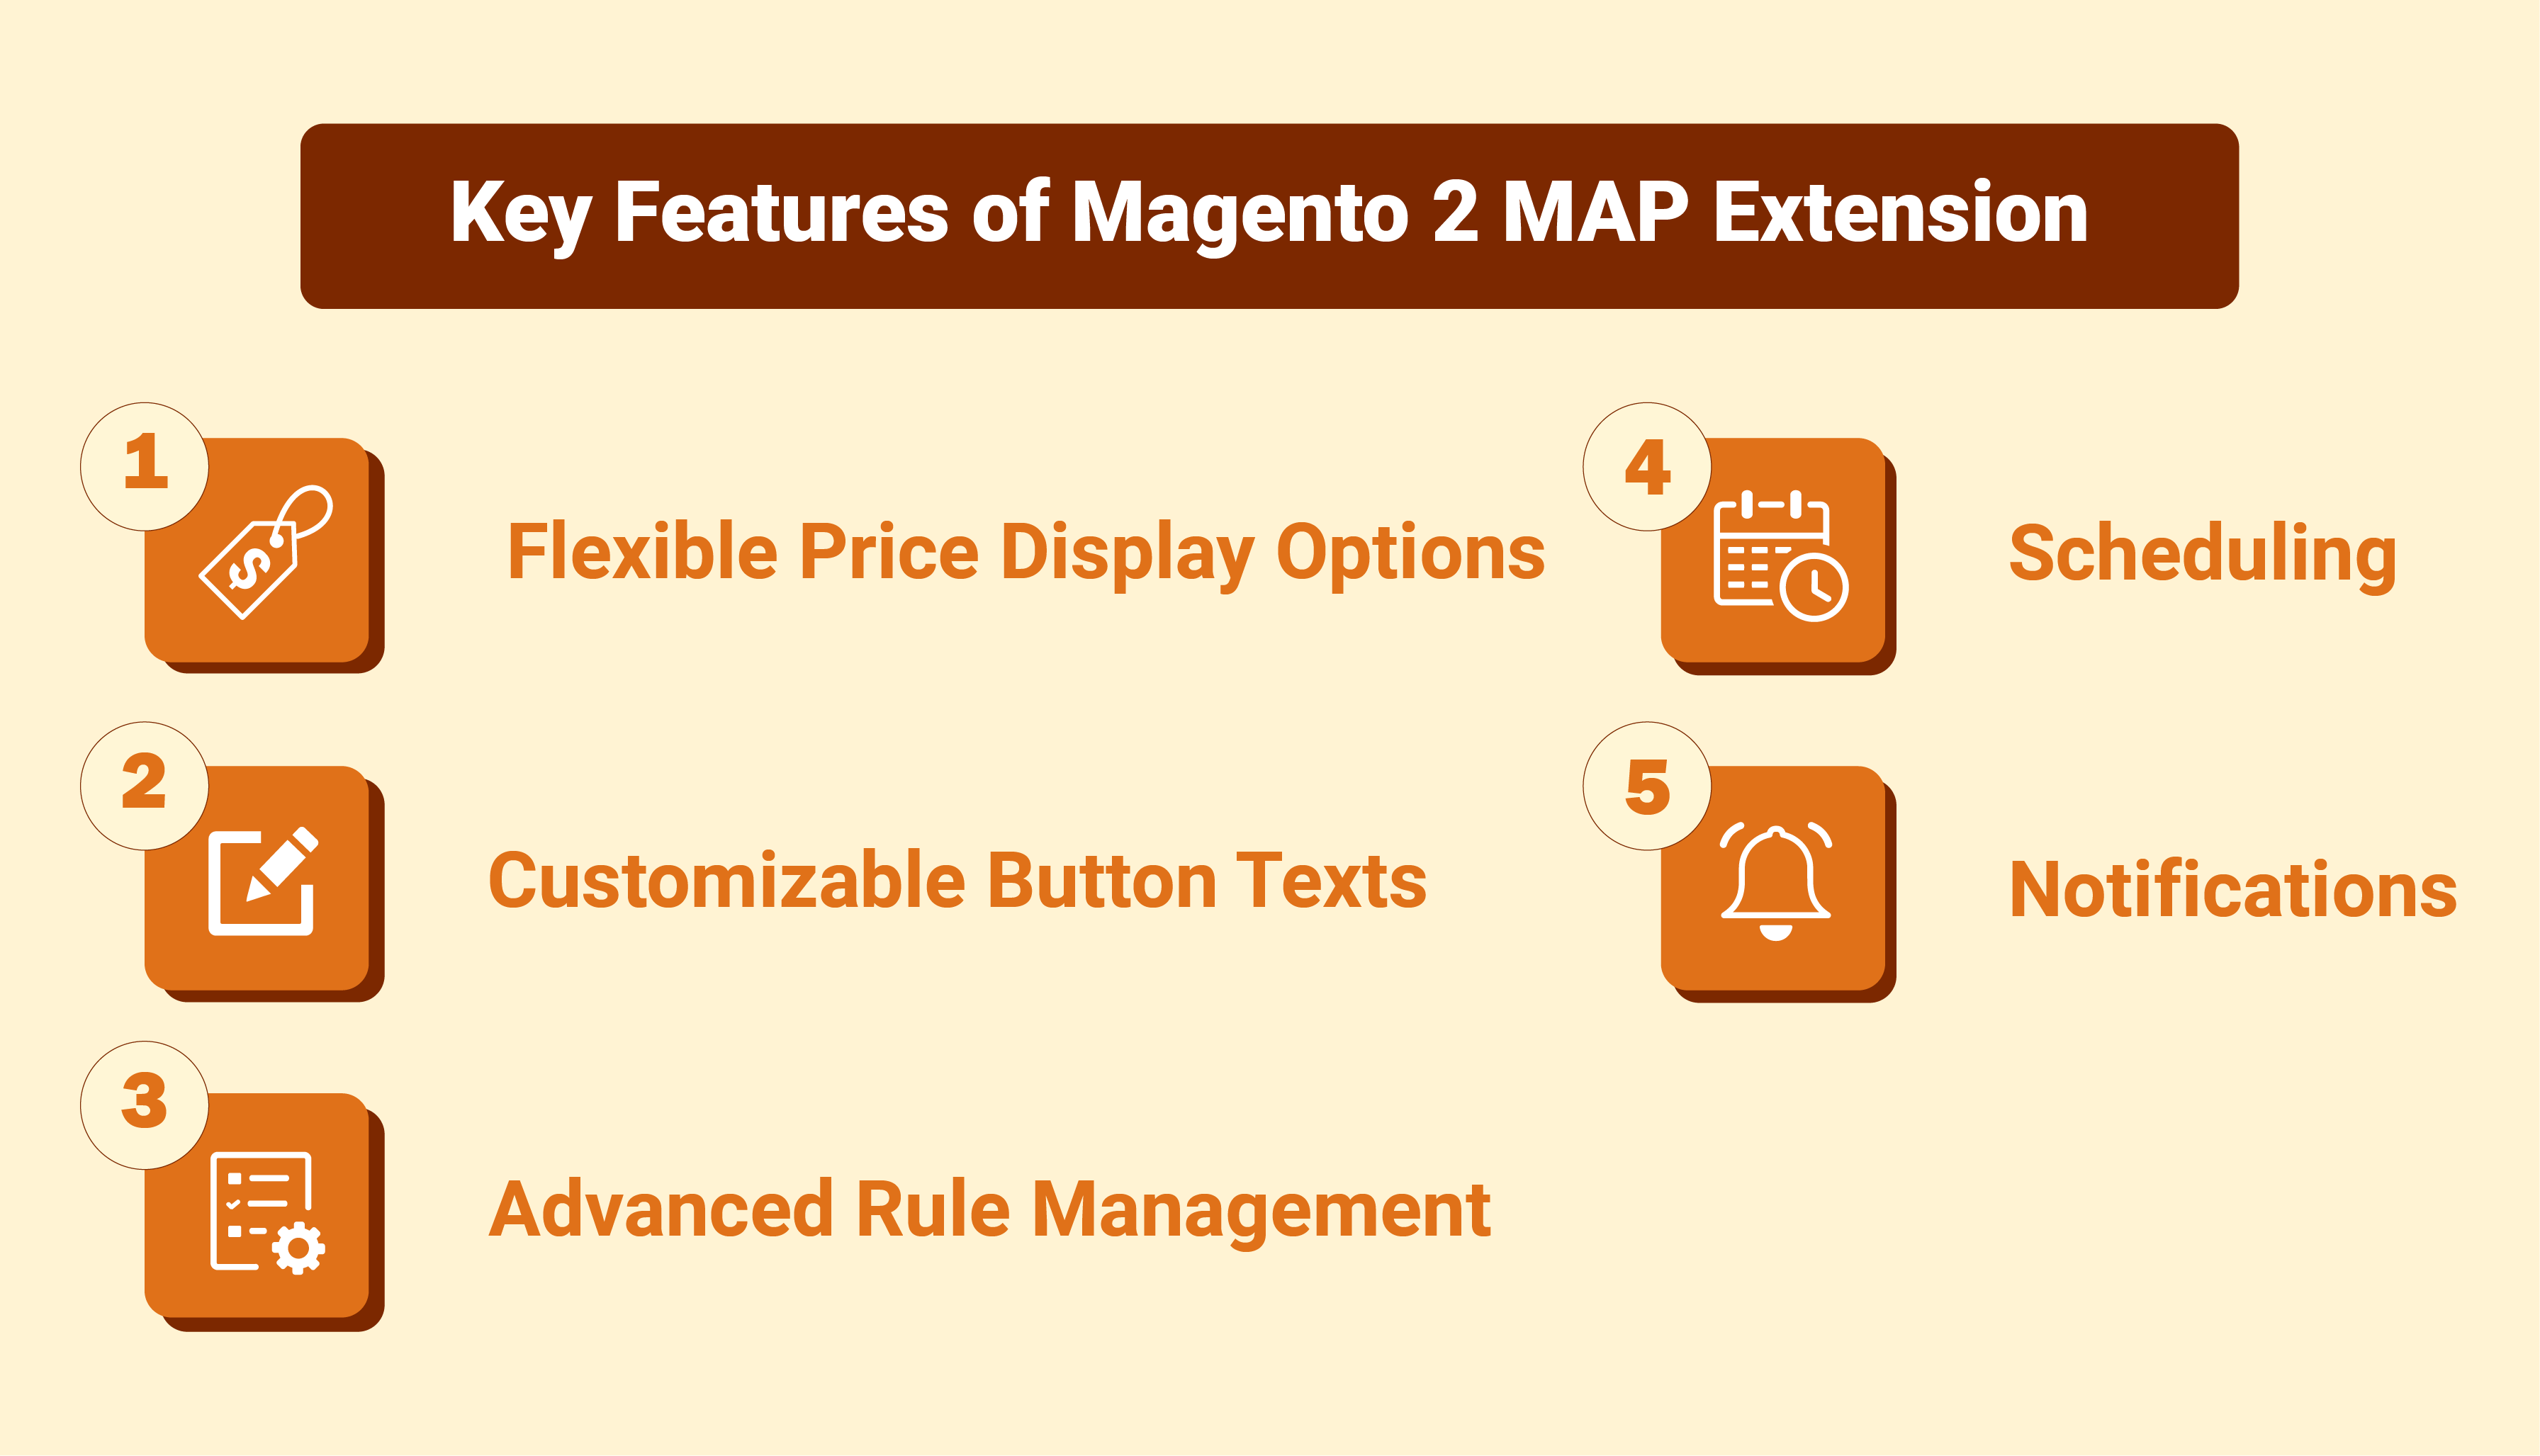 Features of Magento 2 MAP Extension